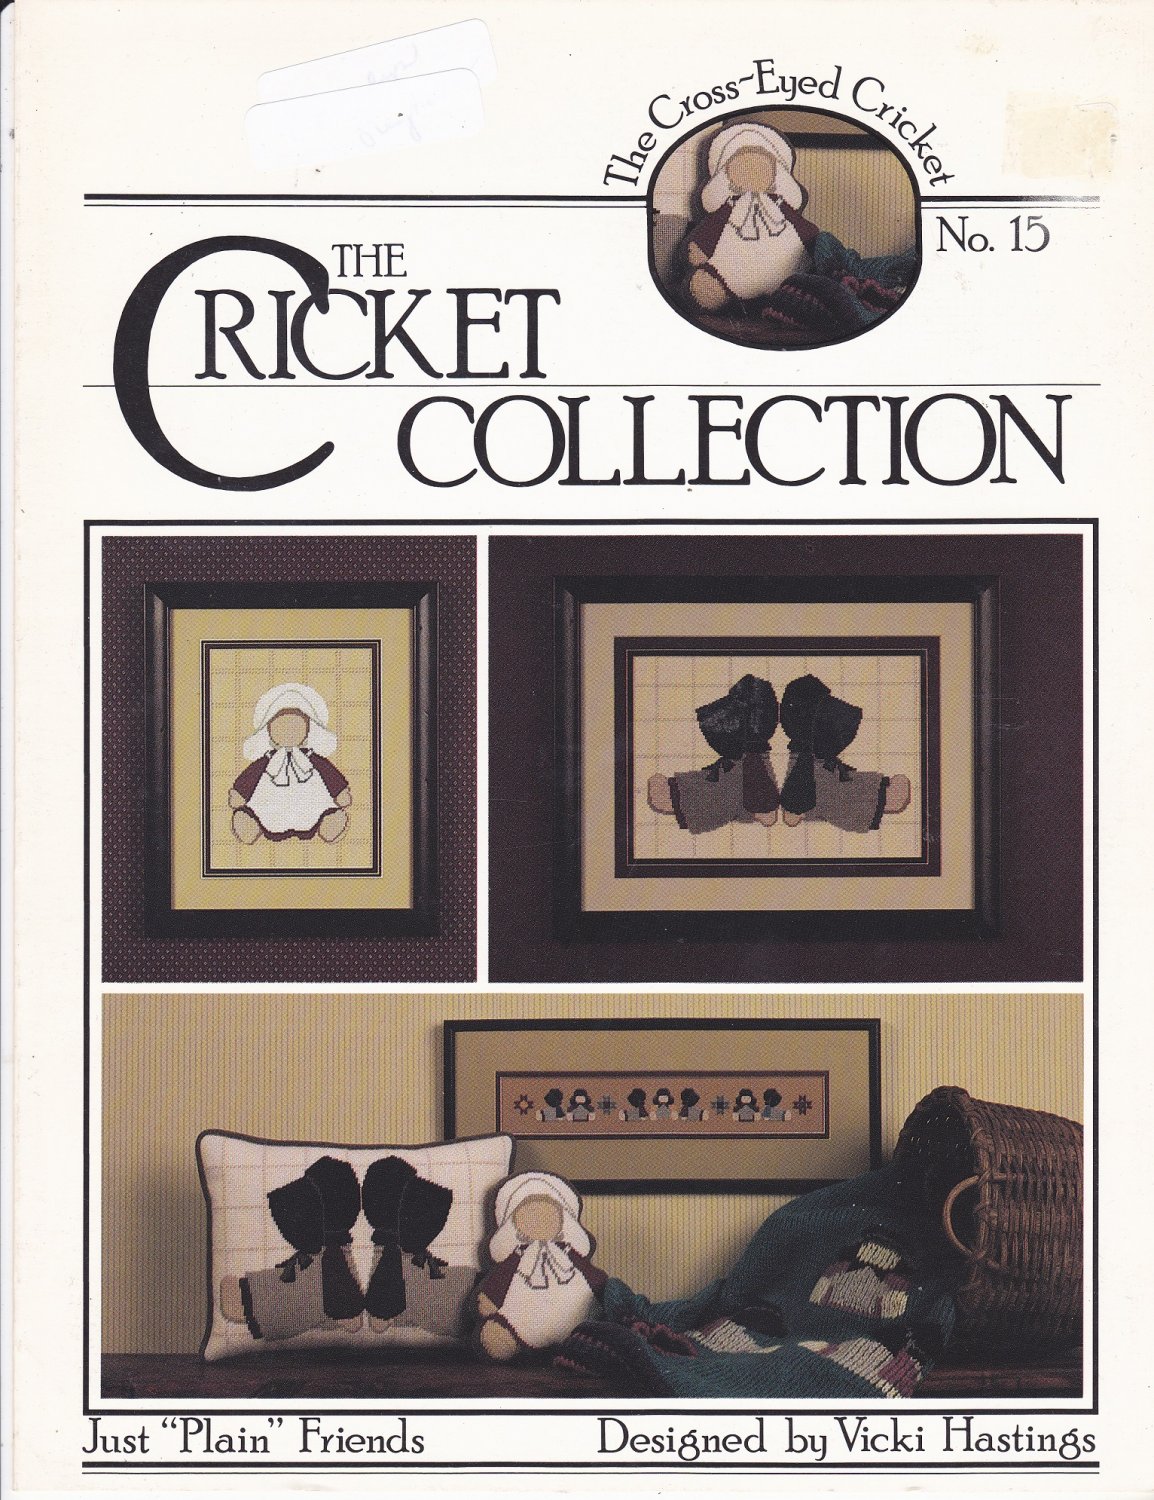 The Cricket collection вышивка крестом. Крикет коллекшн вышивка схемы. Pat Rogers counted collection схема. Cross eyed Cricket вышивка.